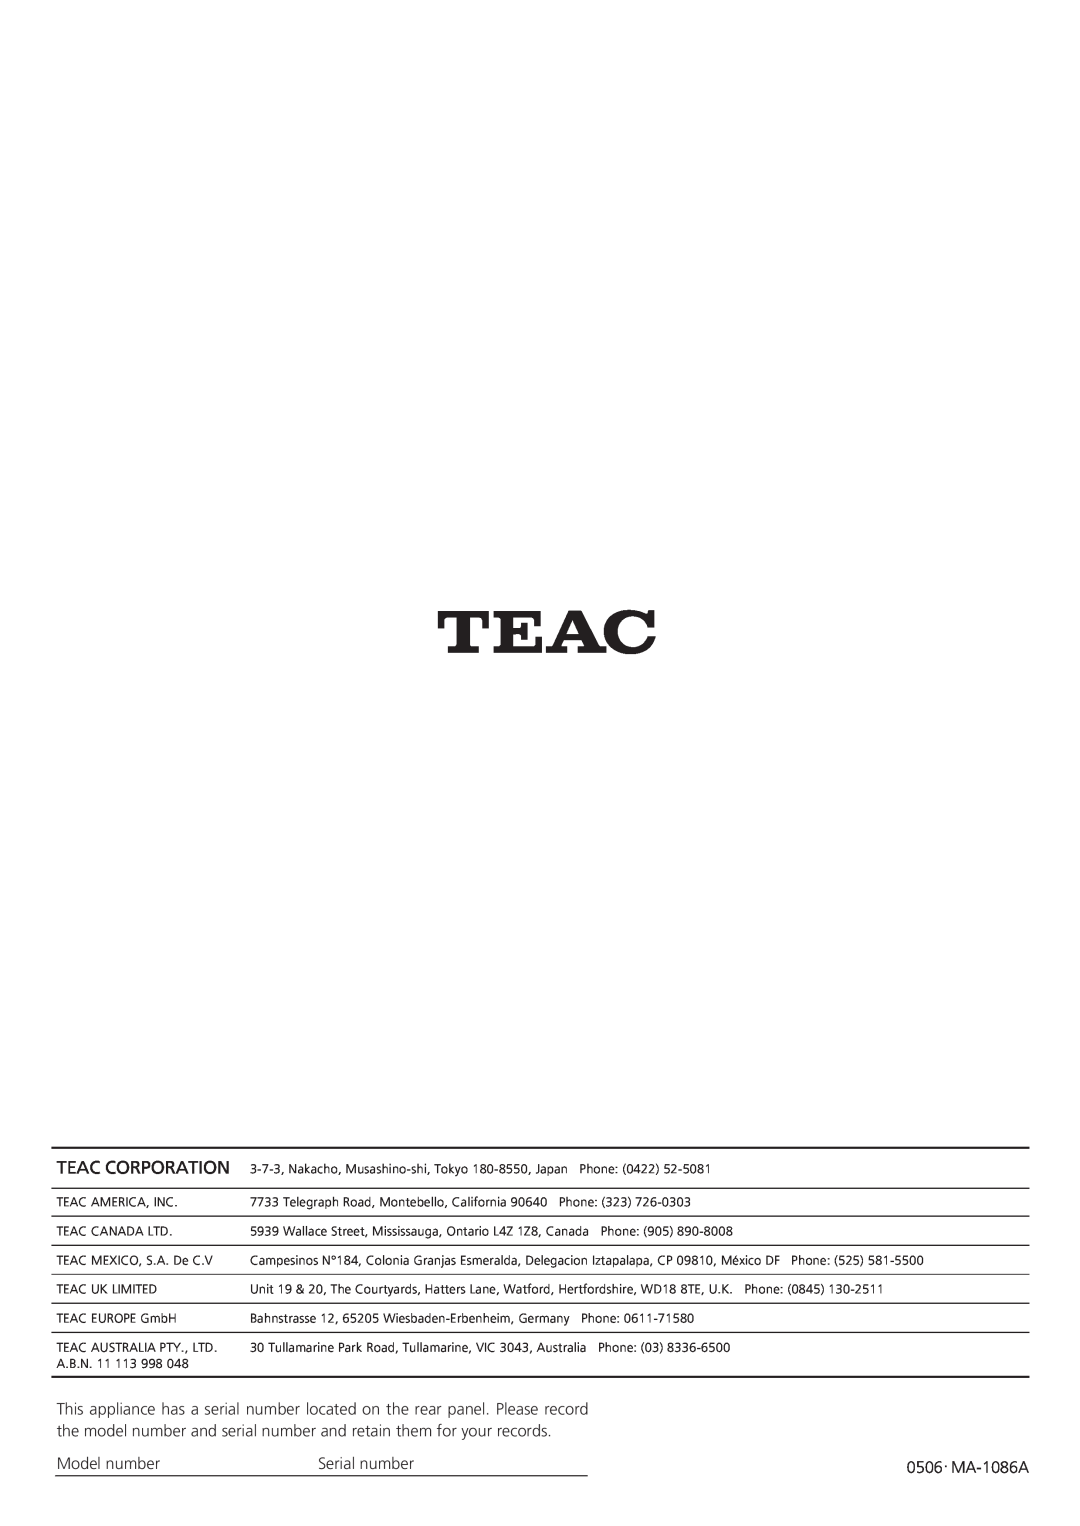 Teac 9A10490600, T-H300DABmkIII DAB/AM/FM Stereo Tuner owner manual Teac Corporation, Model number, Serial number, MA-1086A 